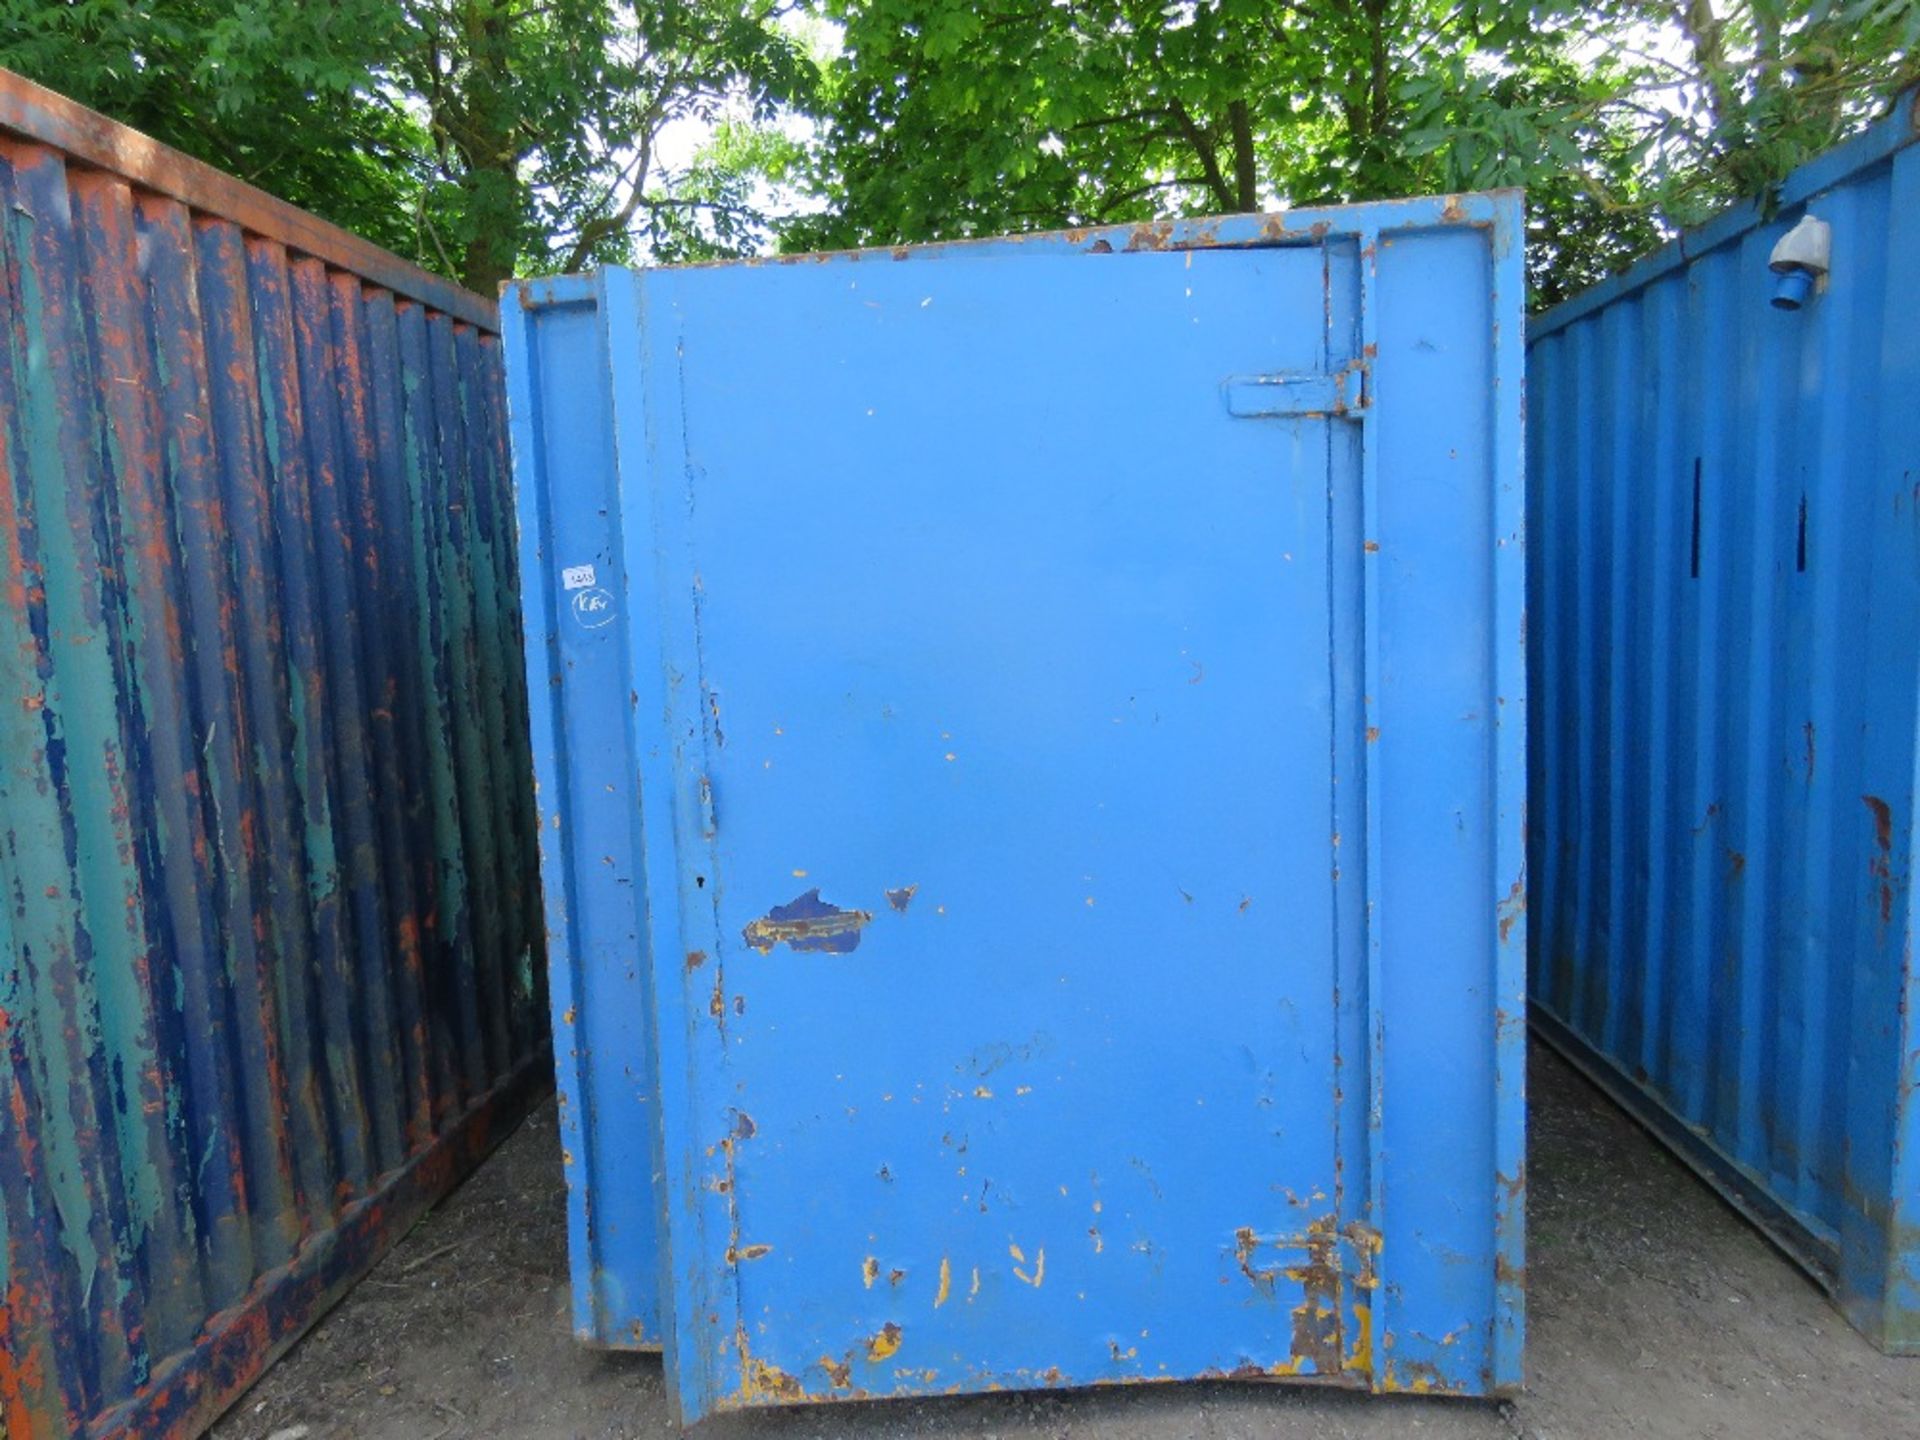 CHAIN LIFT SKIP TYPE ENCLOSED STORAGE CONTAINER 6FT WIDE X 10FT LENGTH APPROX WITH KEY. TS13. - Image 5 of 5